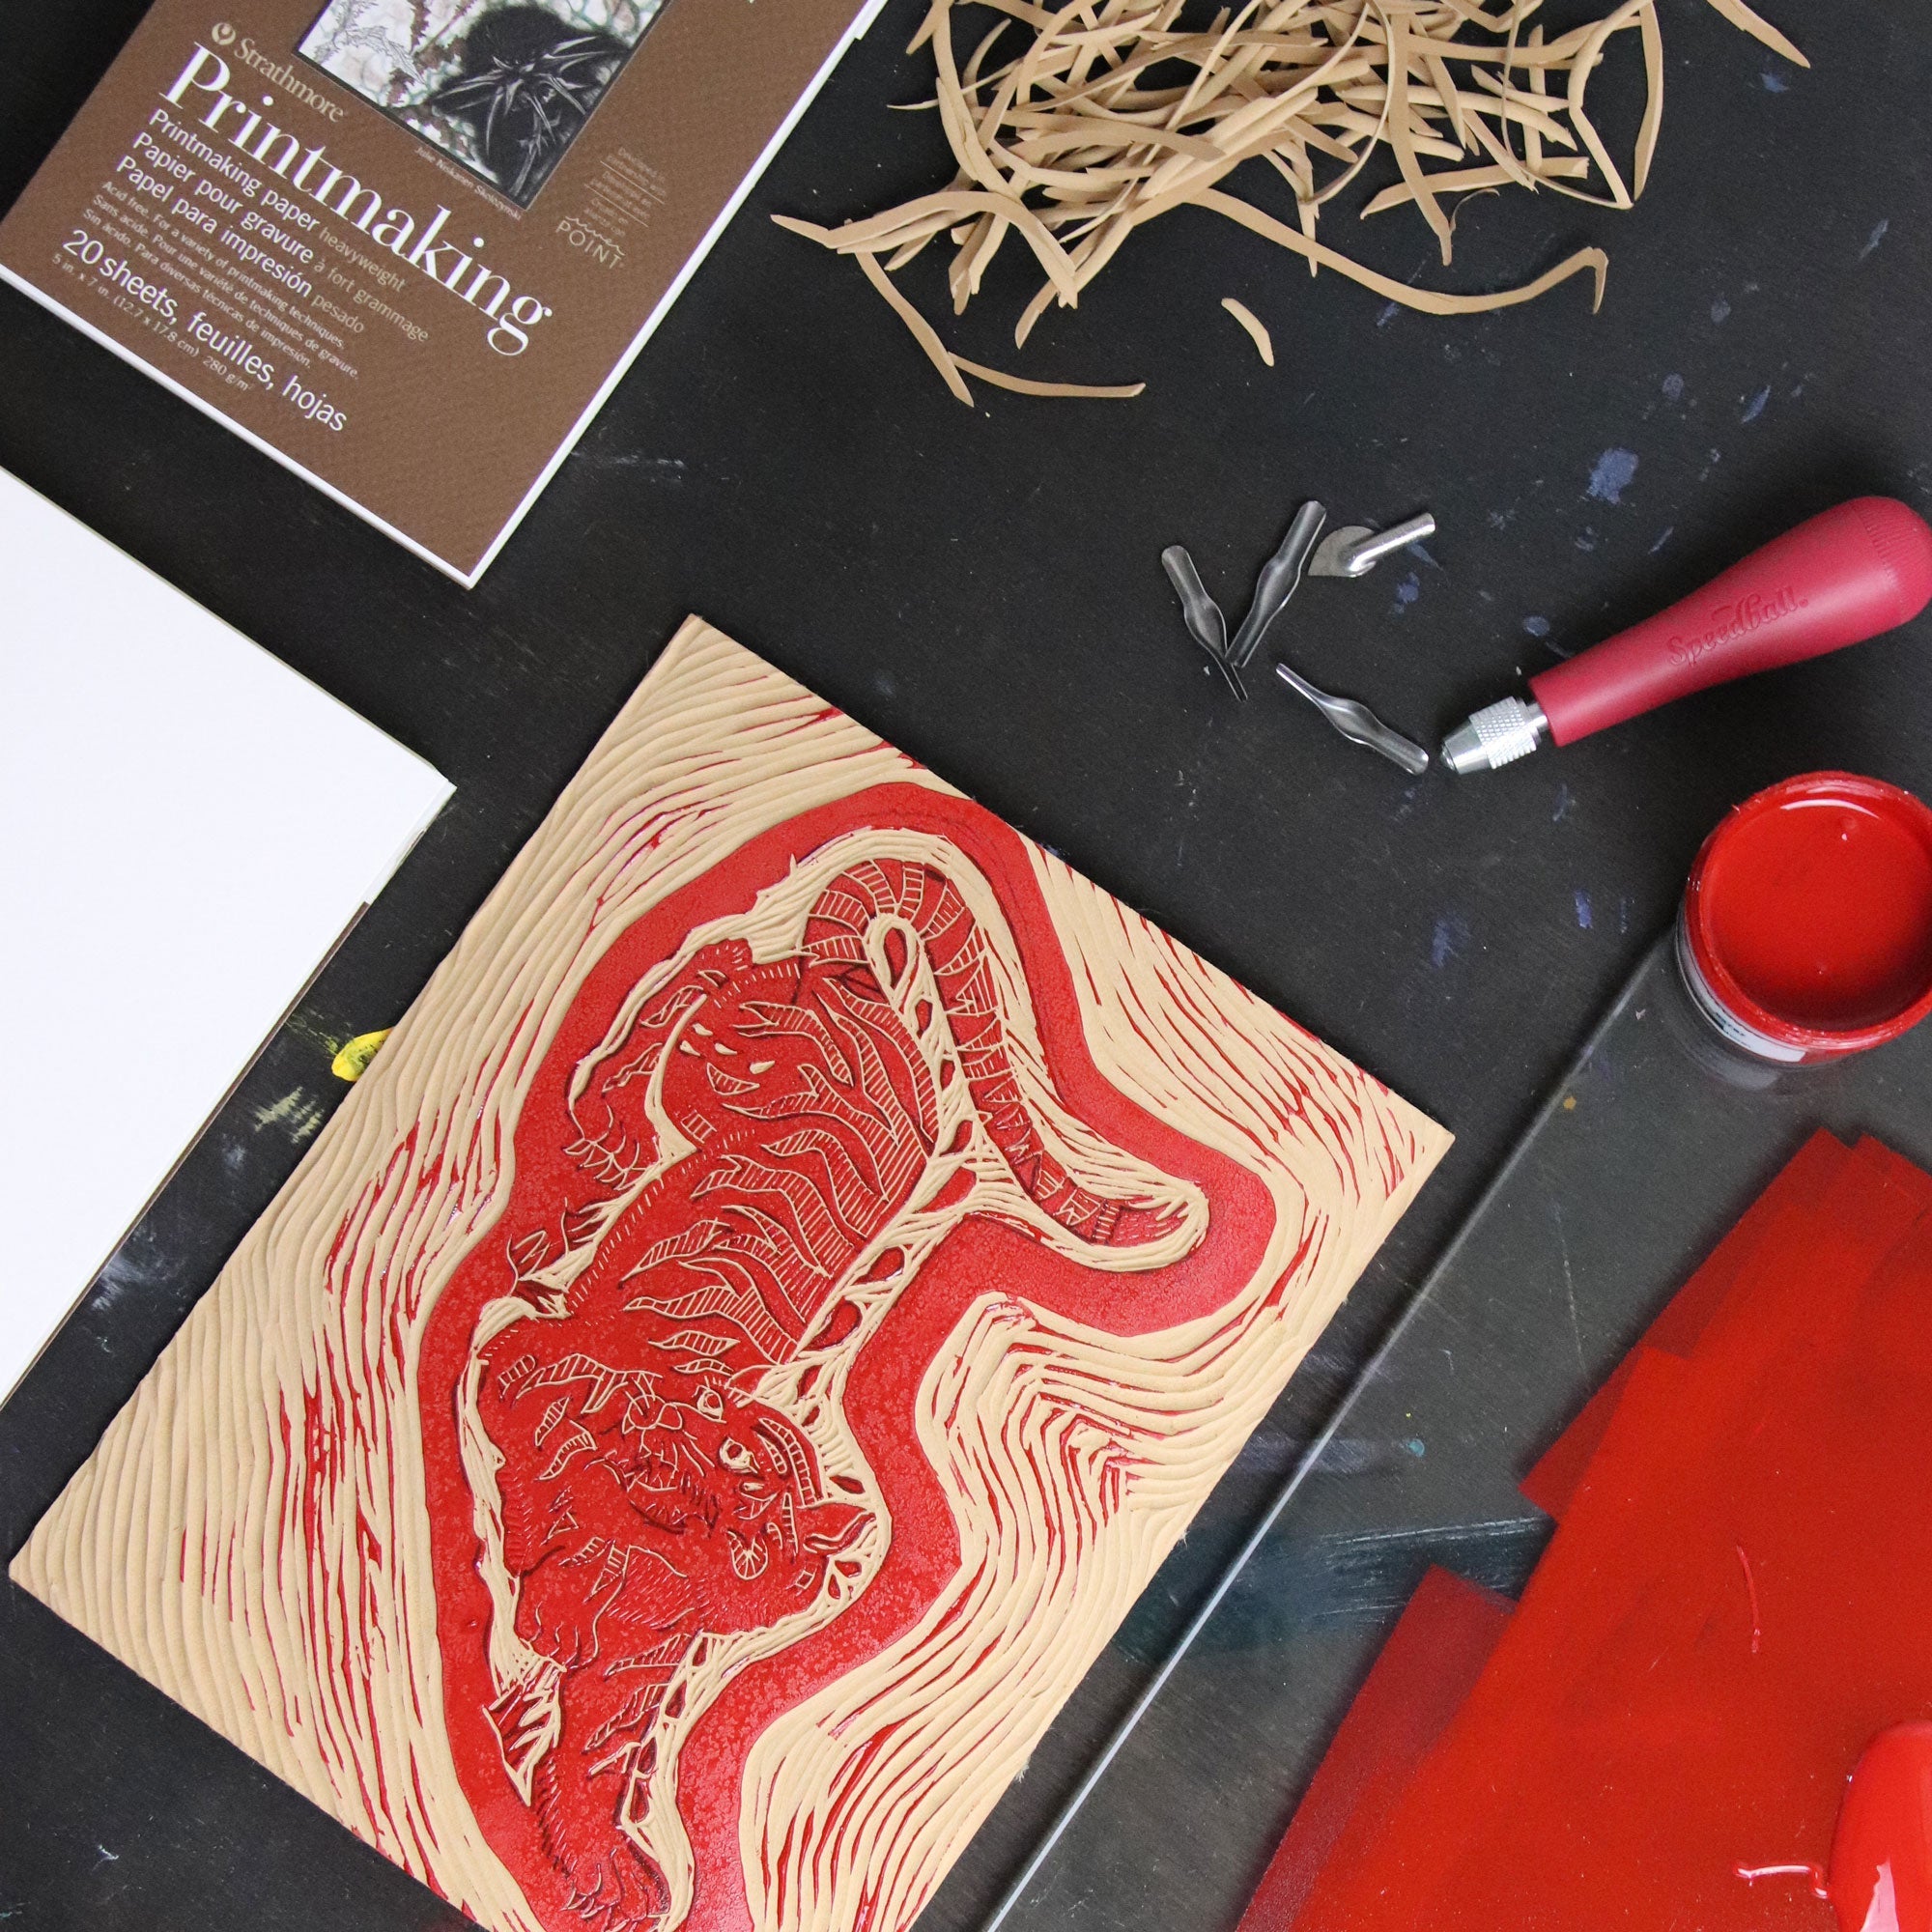 Printmaking 101 : An Introduction to Printmaking Techniques – Opus Art  Supplies